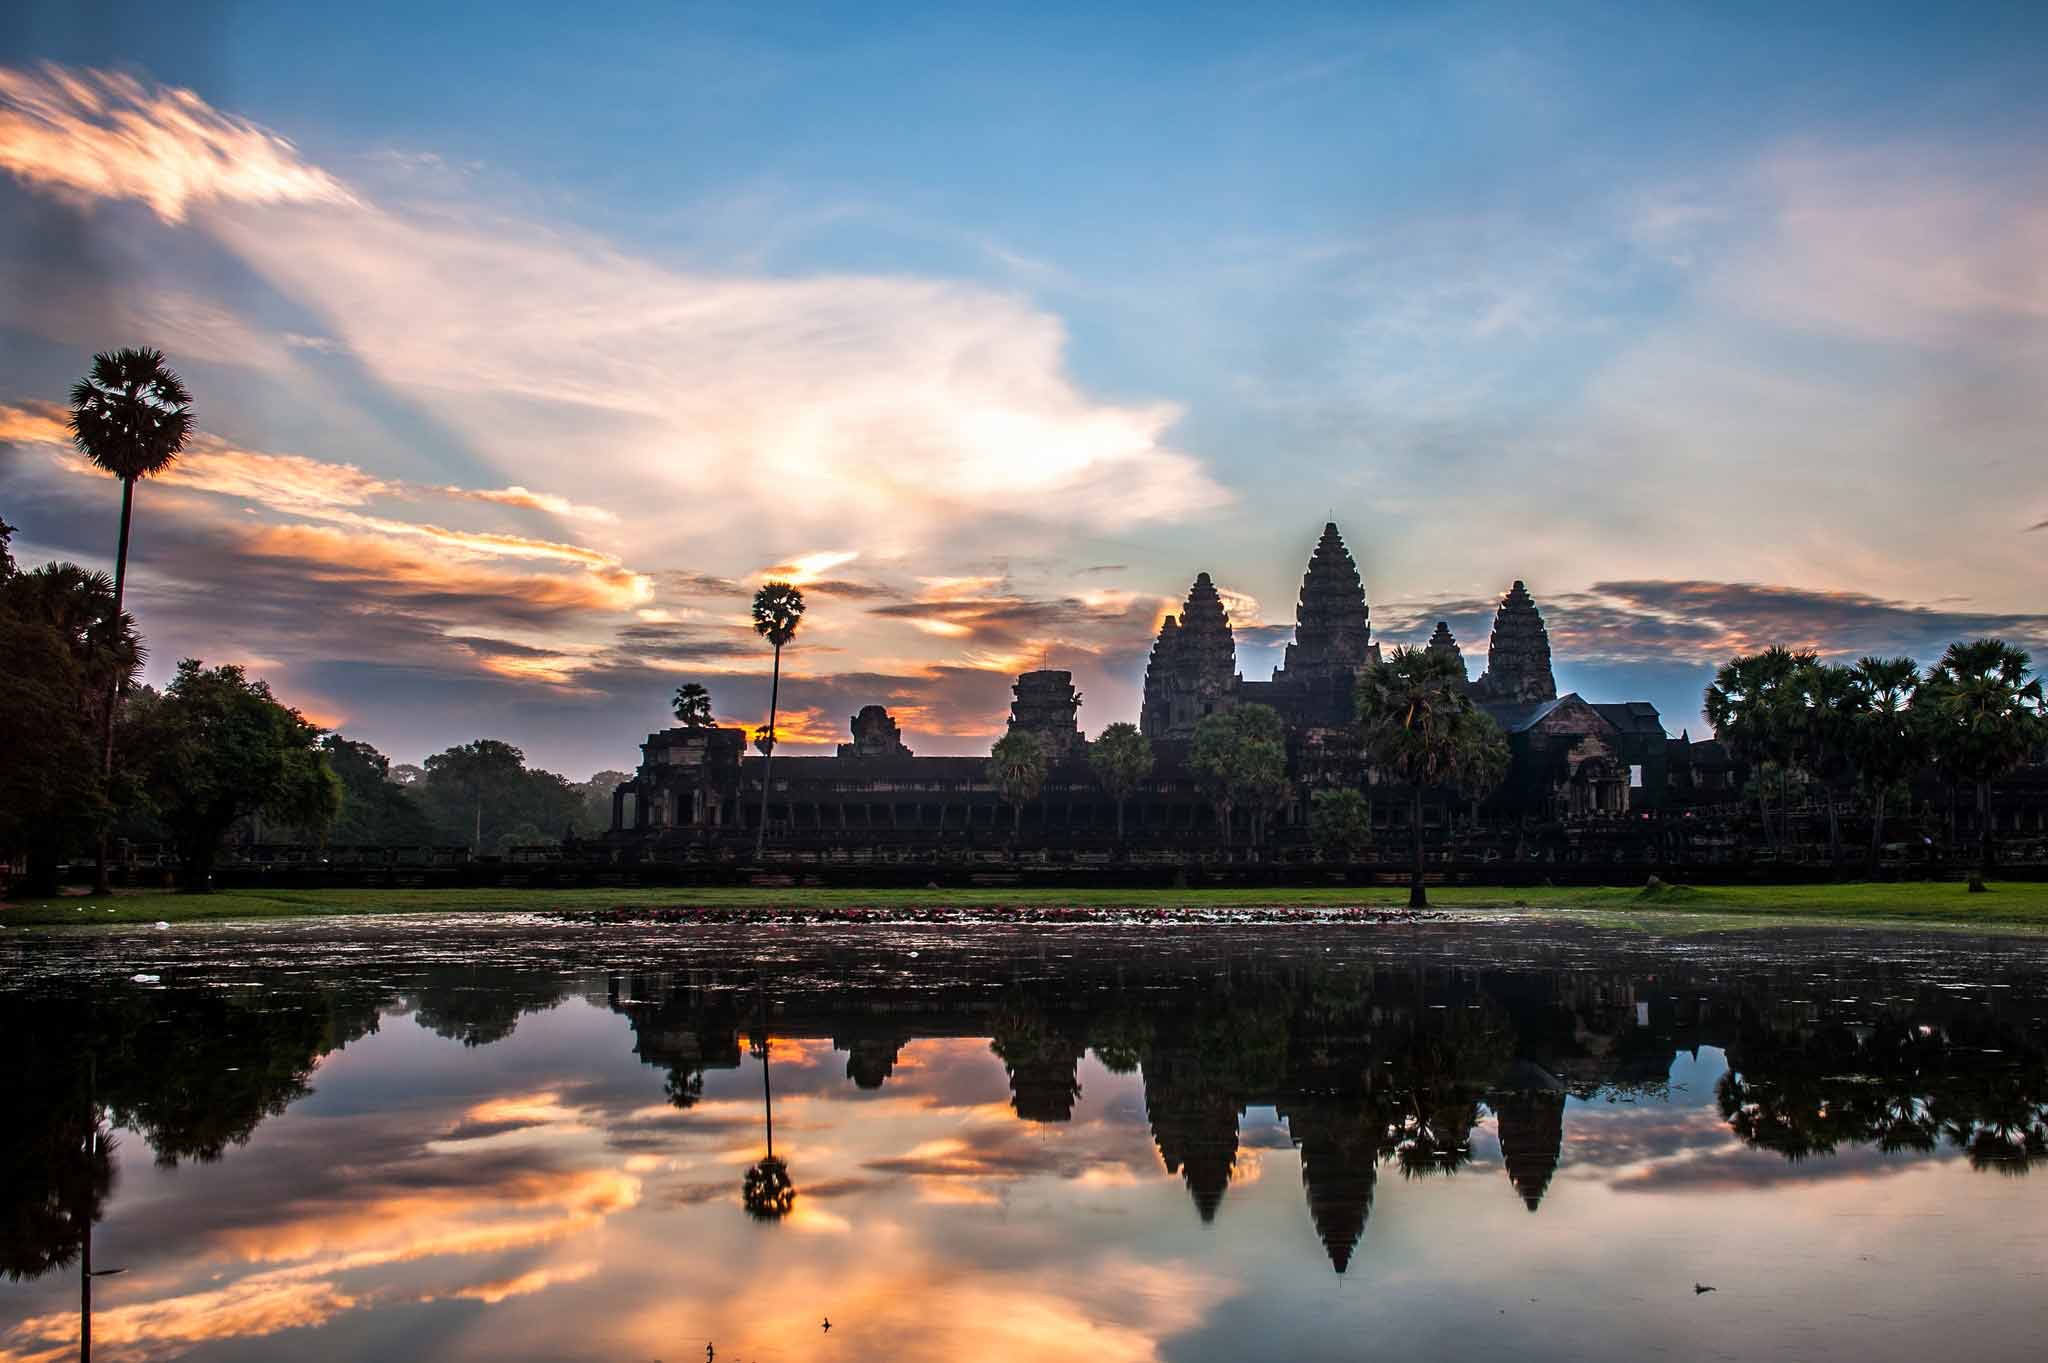 Silhouette of Angkor Wat temple against a pink and purple sky during sunrise.